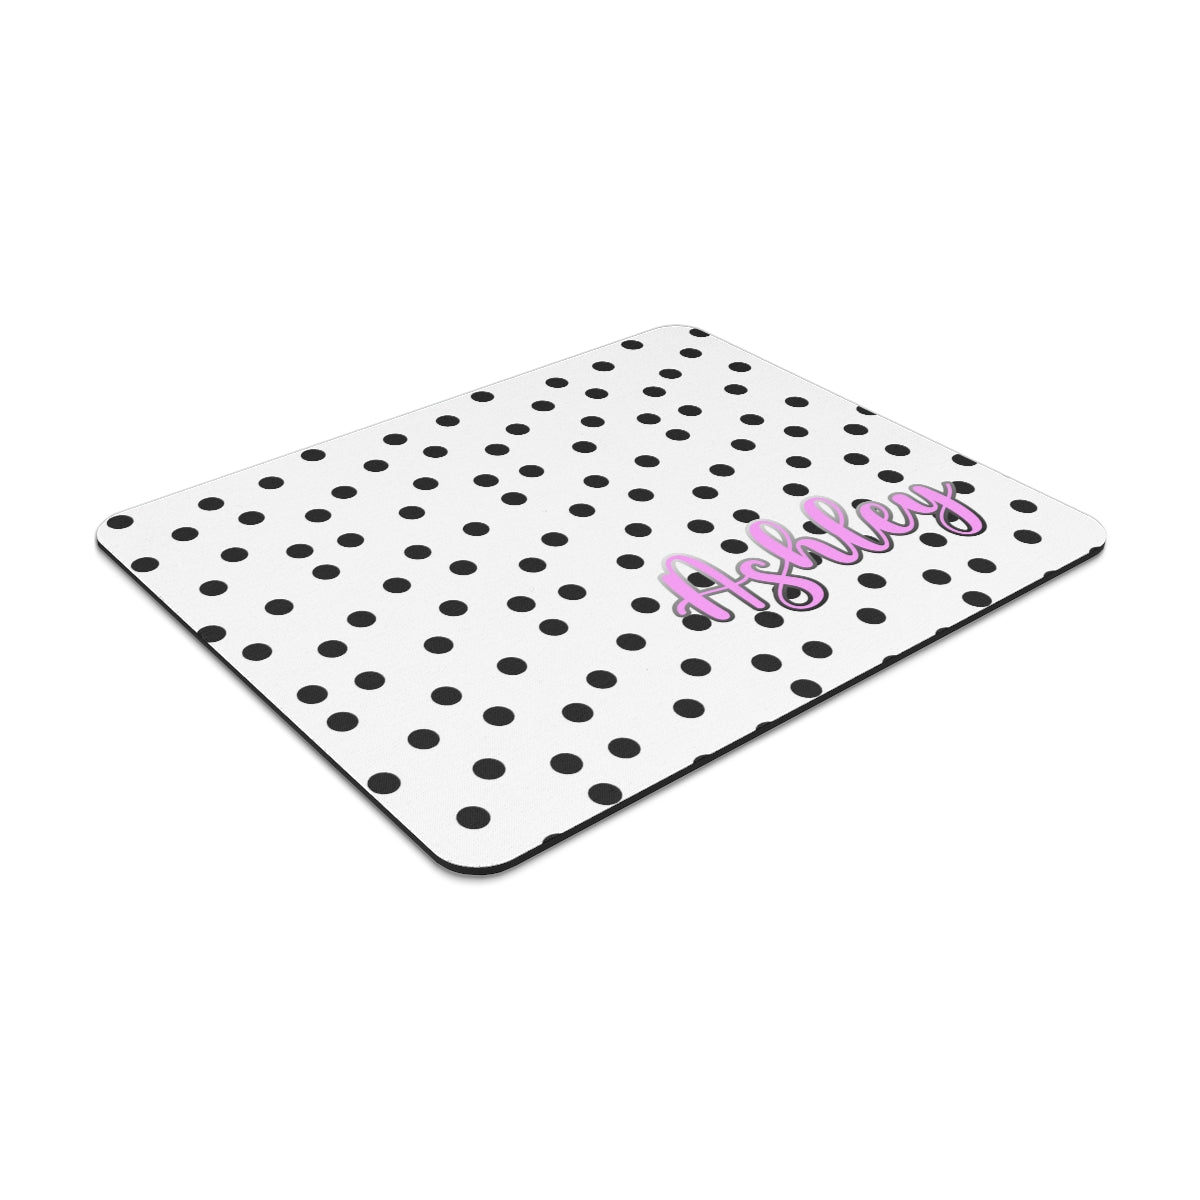 Personalized Black and White Polka Dot Mouse Pad with Pink Name